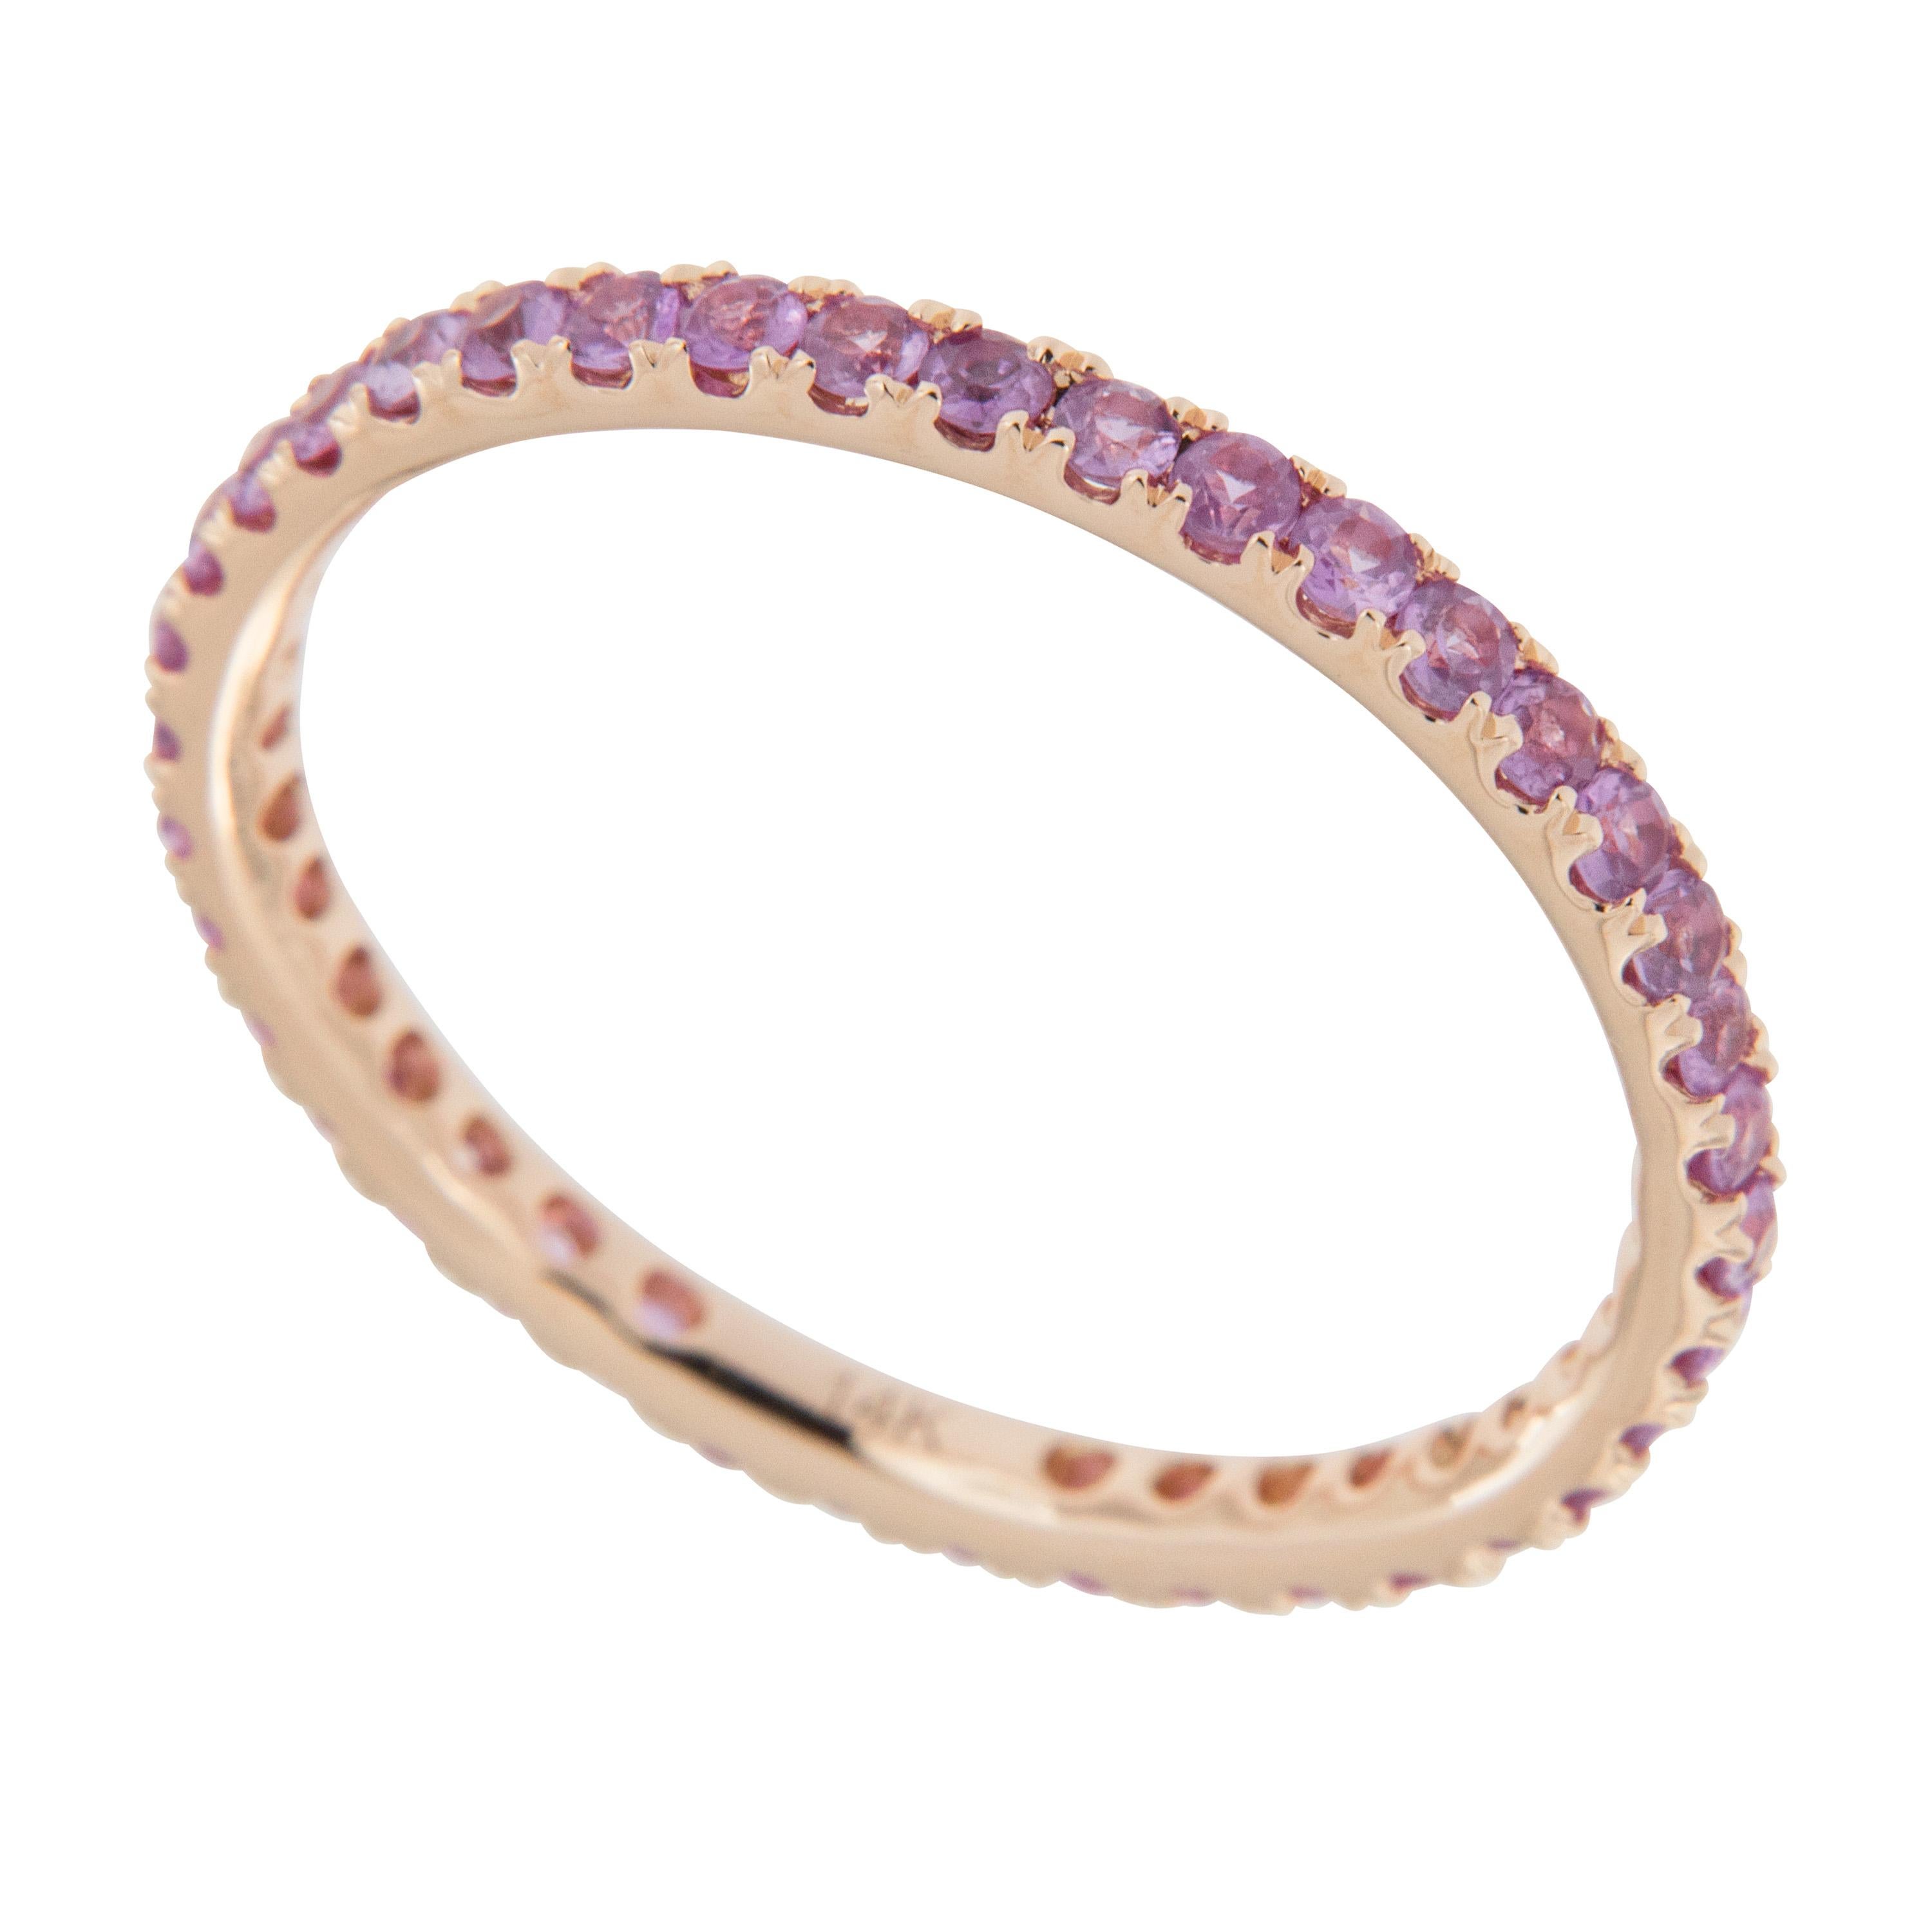 Tickle her pink with this 18 karat rose gold pink sapphire eternity ring with 39 sapphires = 0.59 Cttw in a size 6.25! Sapphire is the birthstone for September and also given as a gem for the 5th, 23rd and 45th wedding anniversaries. This ring looks